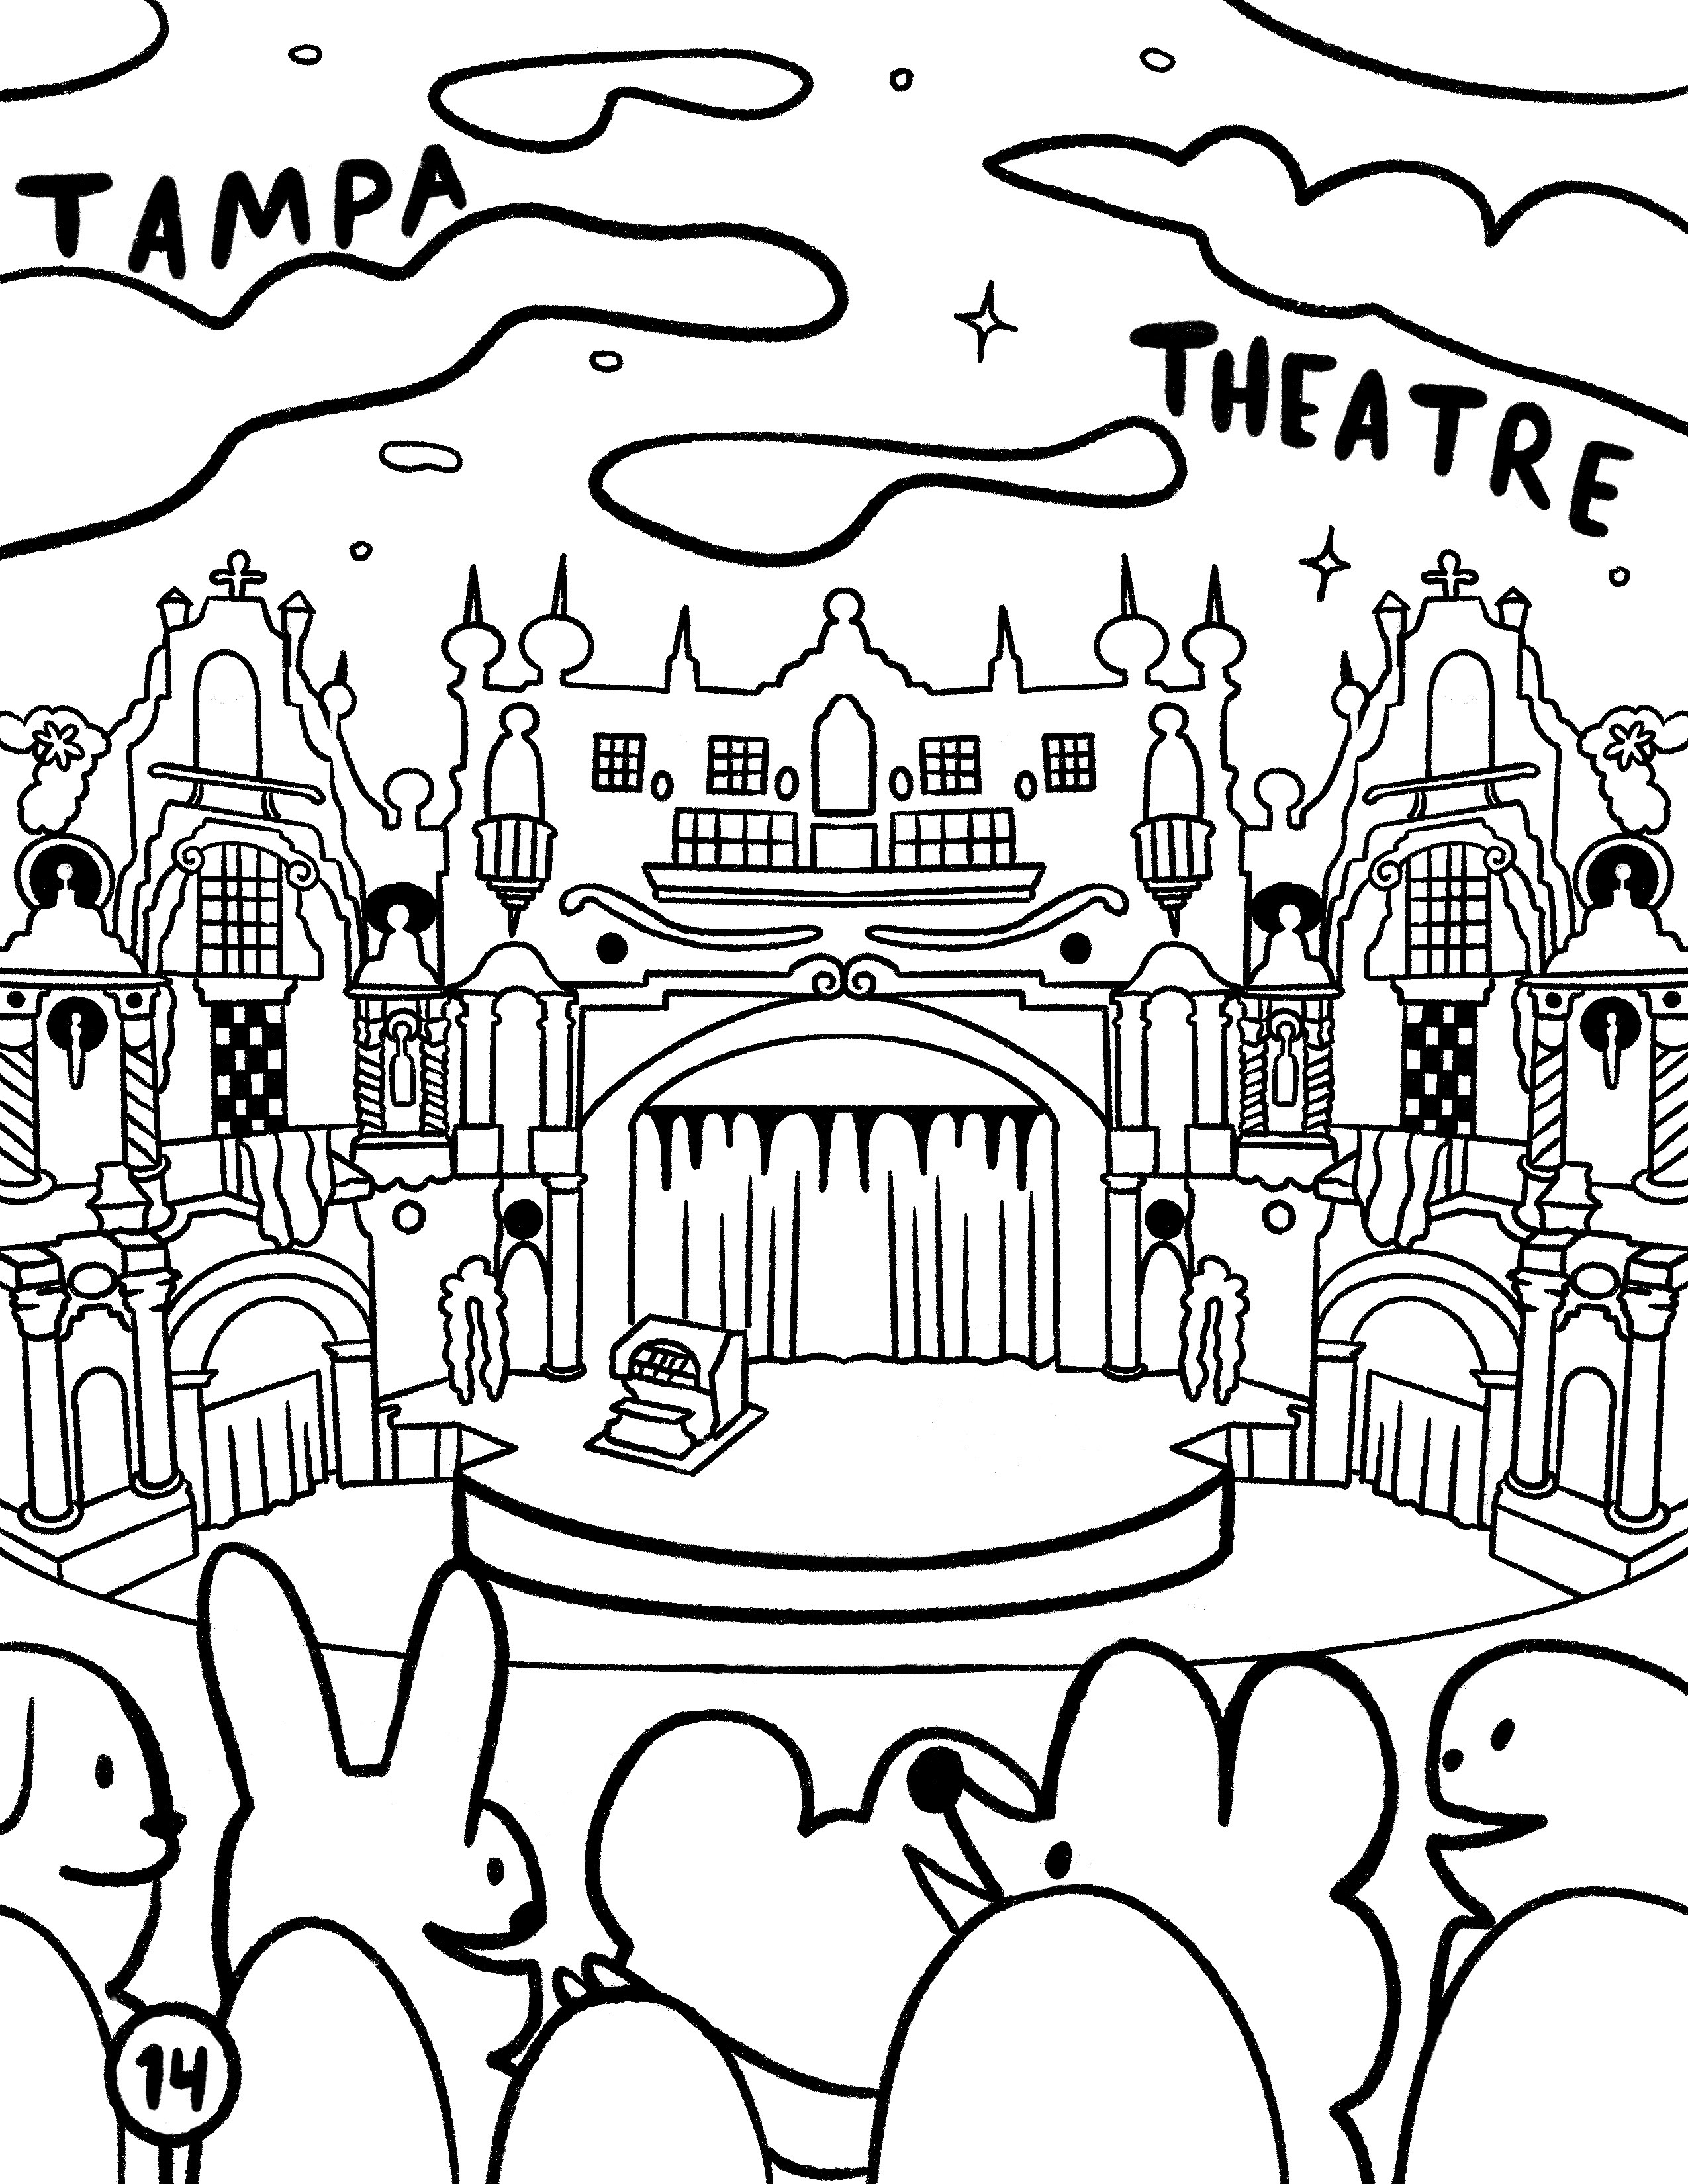 Anxious, isolated? This Tampa Bay-themed coloring book could help